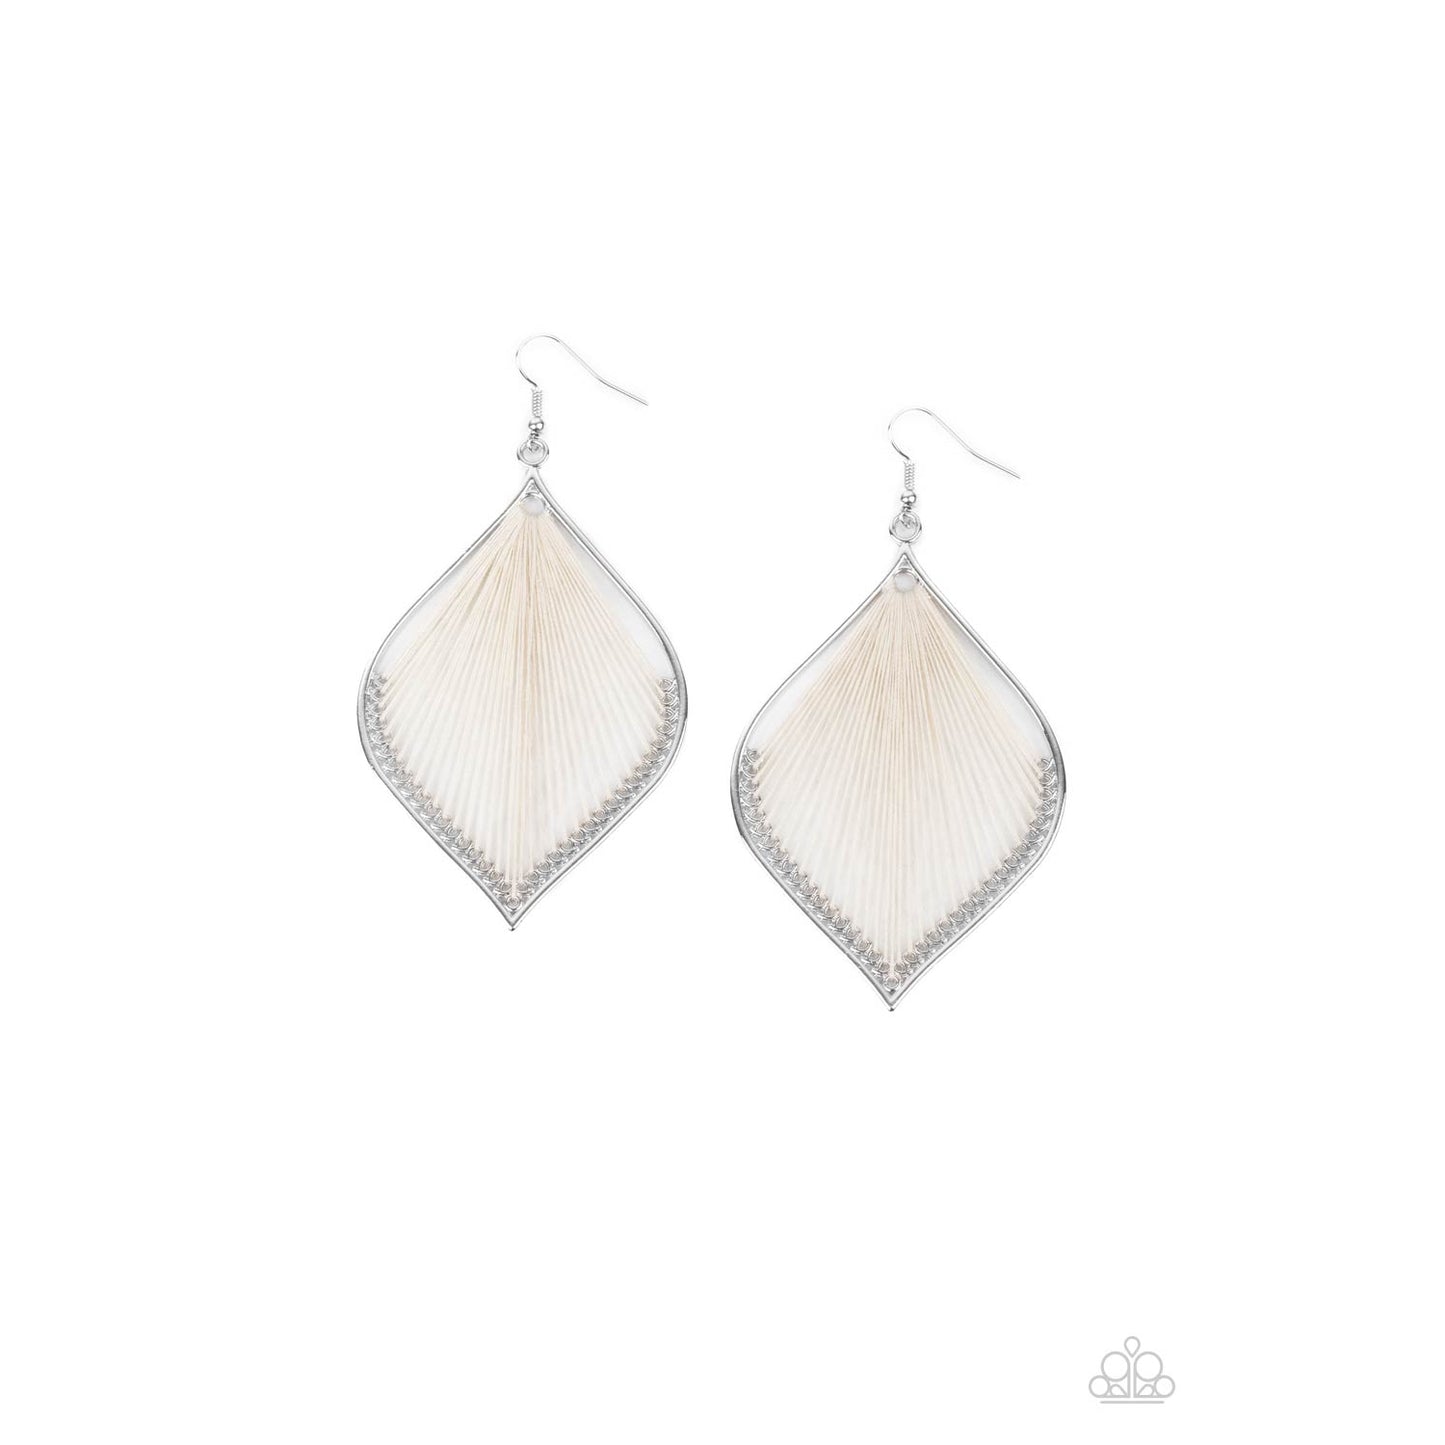 String Theory - White Earrings - Paparazzi Accessories - GlaMarous Titi Jewels